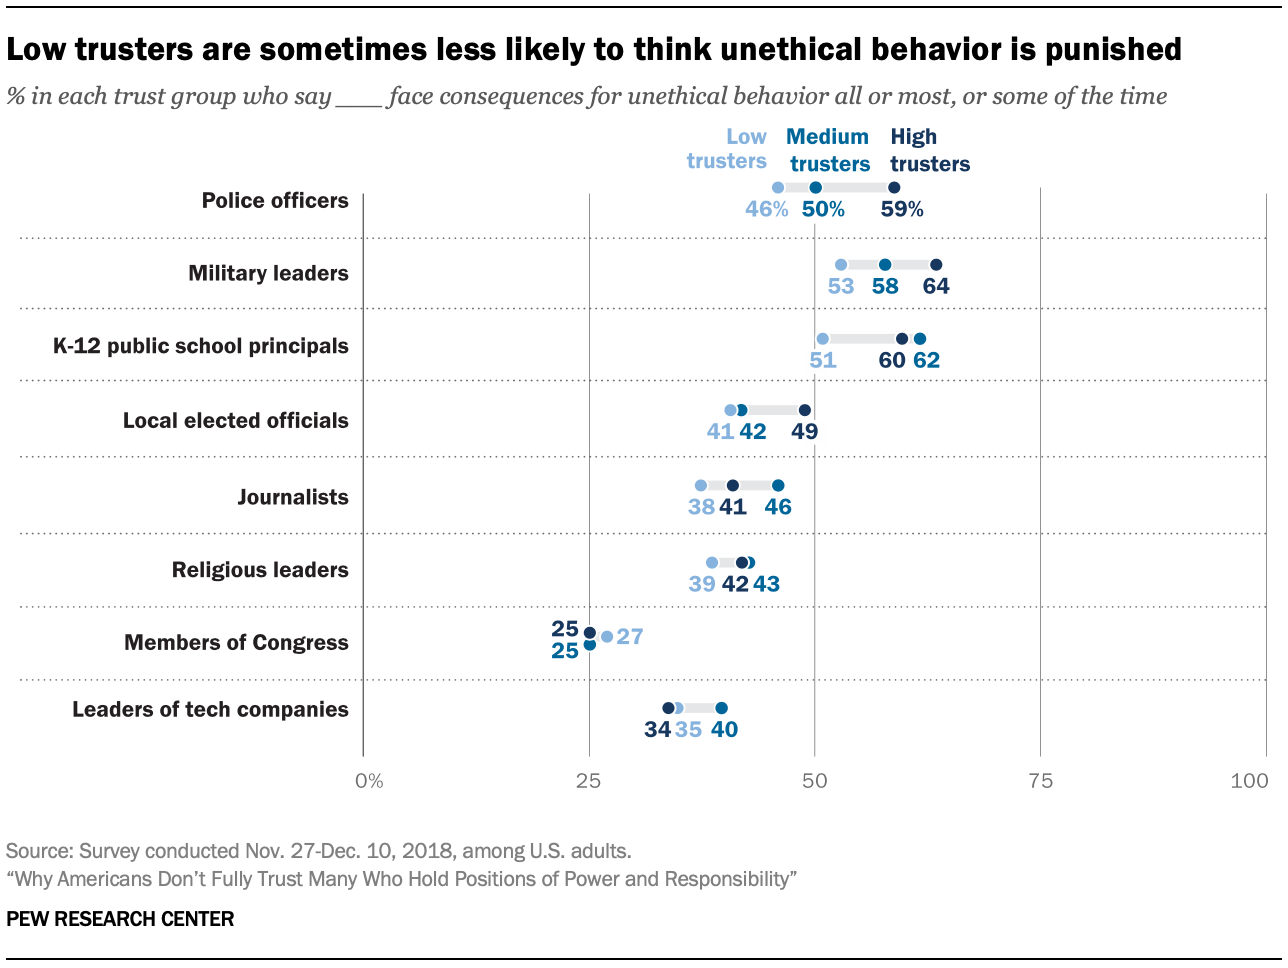 Low trusters are sometimes less likely to think unethical behavior is punished